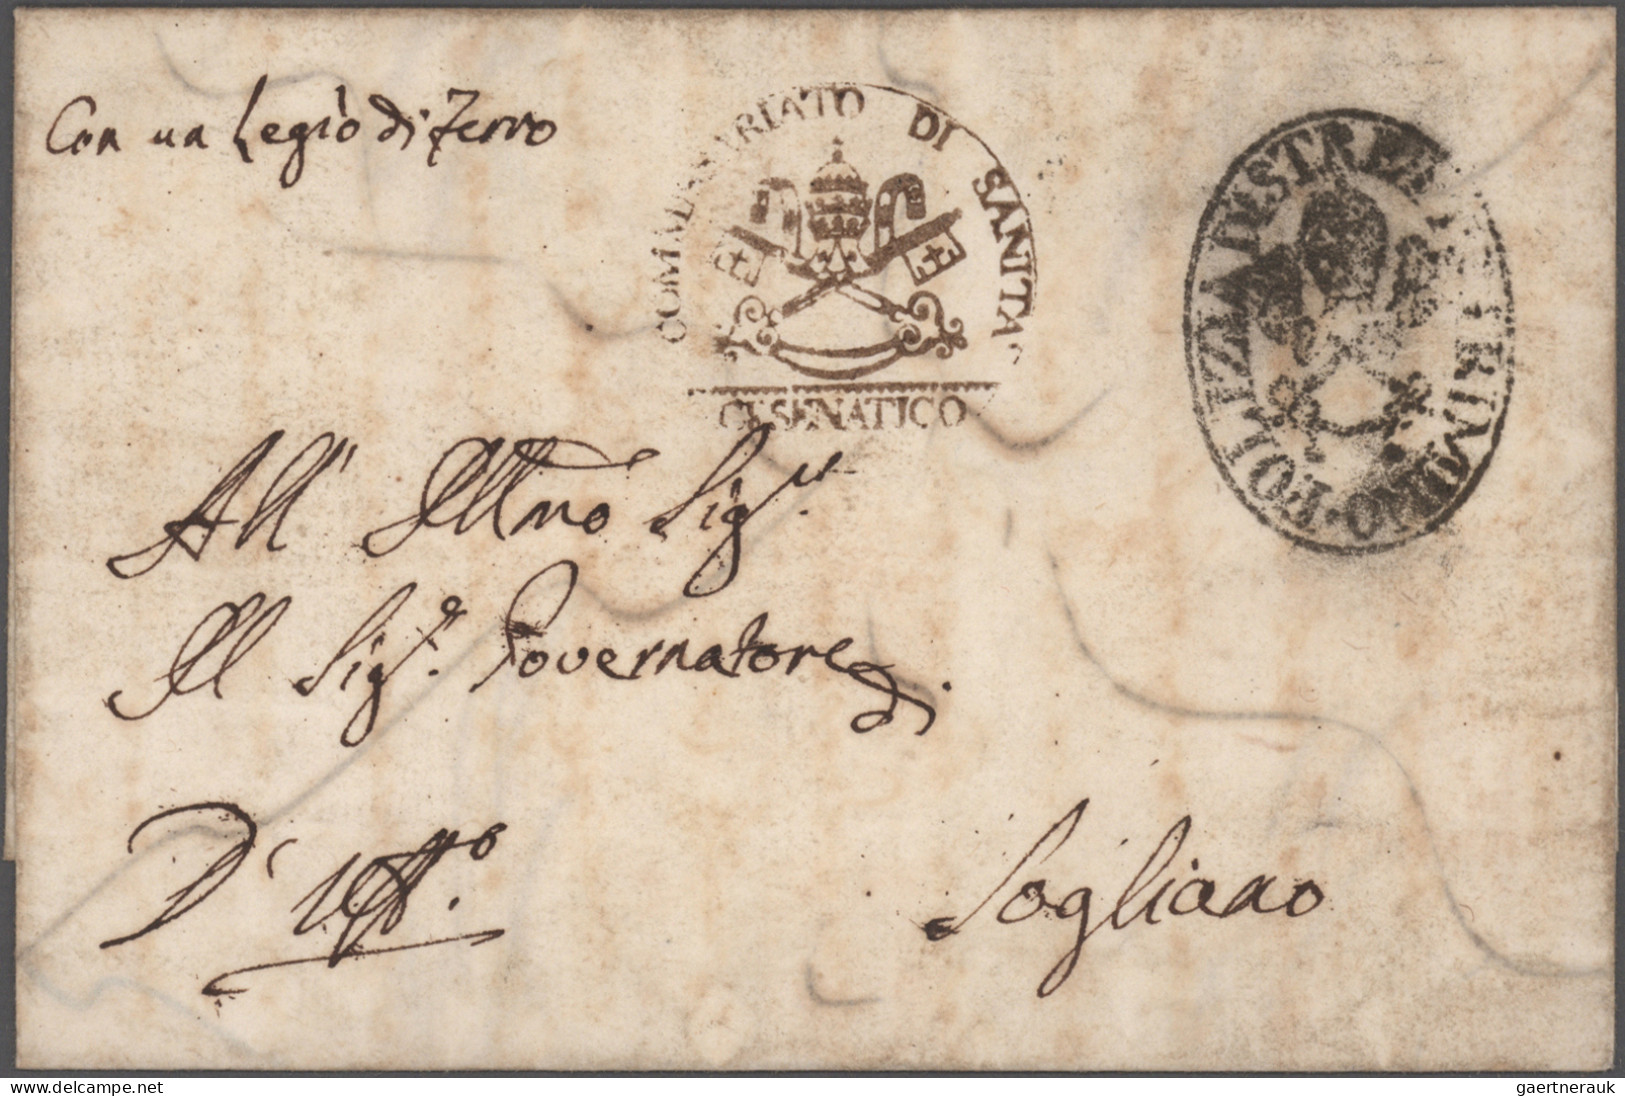 Disinfection Mail: 1716/1911, extraordinary exhibit collection of 52 disinfected